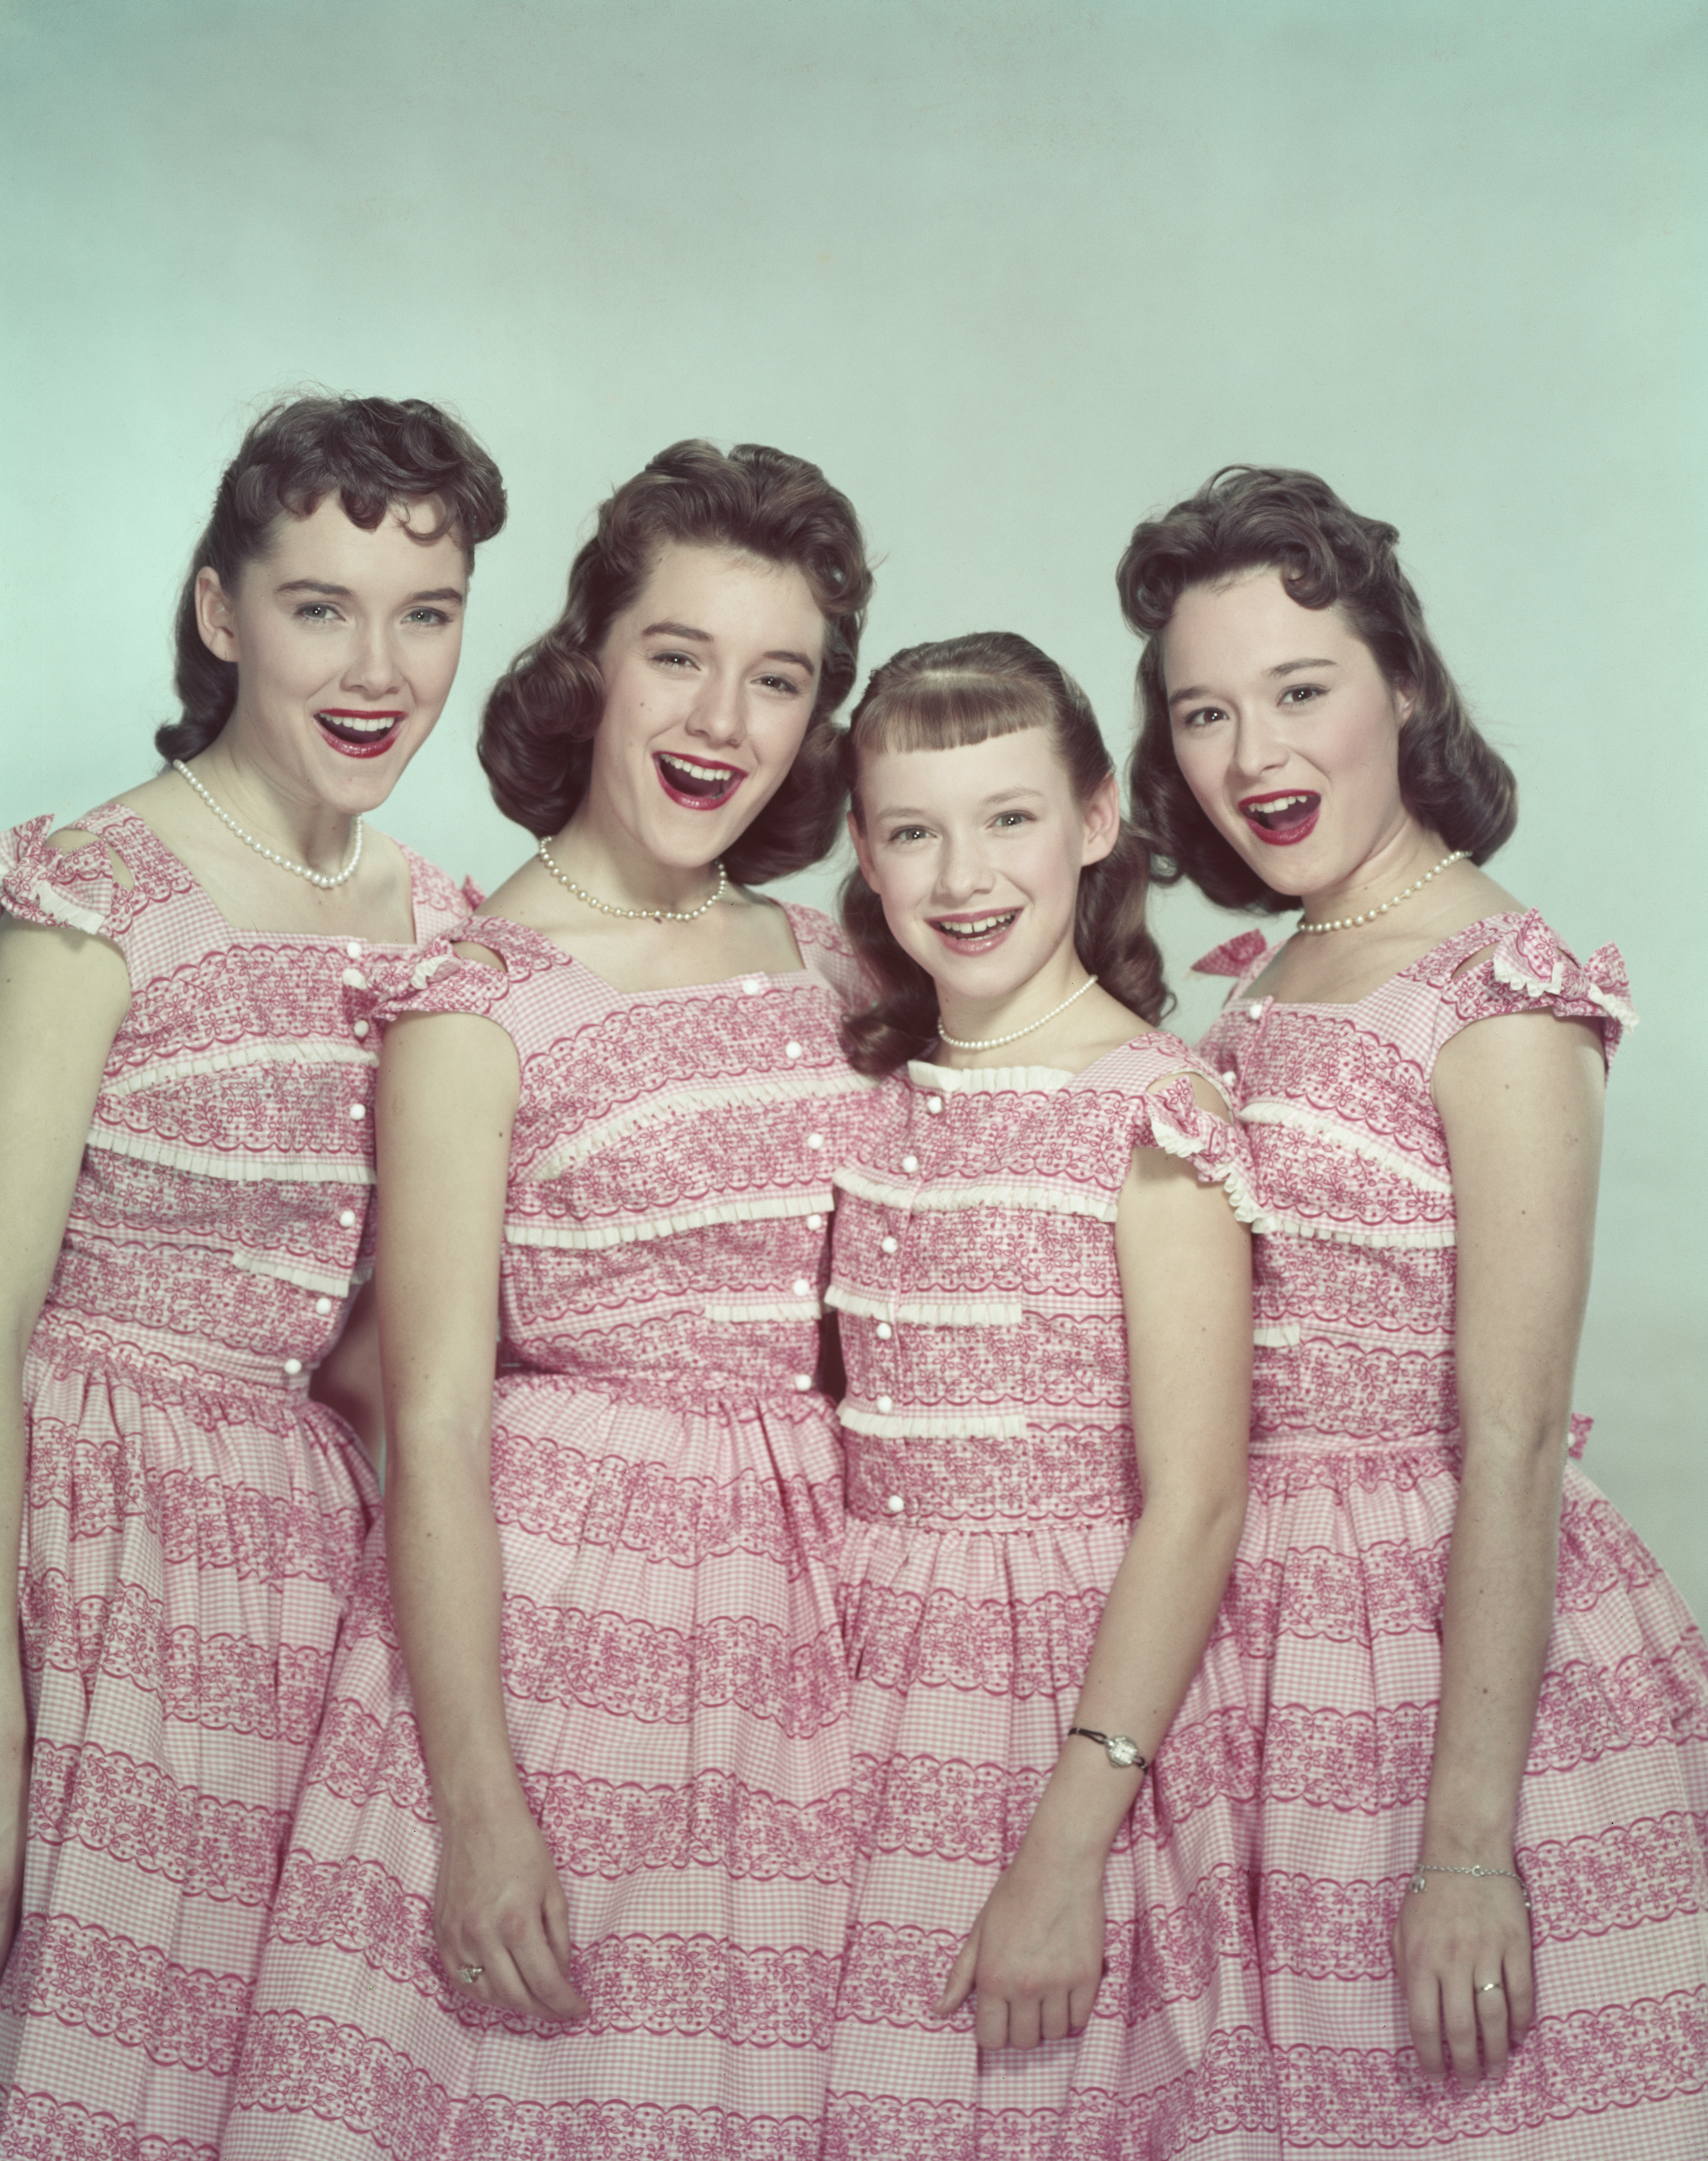 The original members of The Lennon Sisters posing for a portrait photograph in 1955 | Source: Getty Images